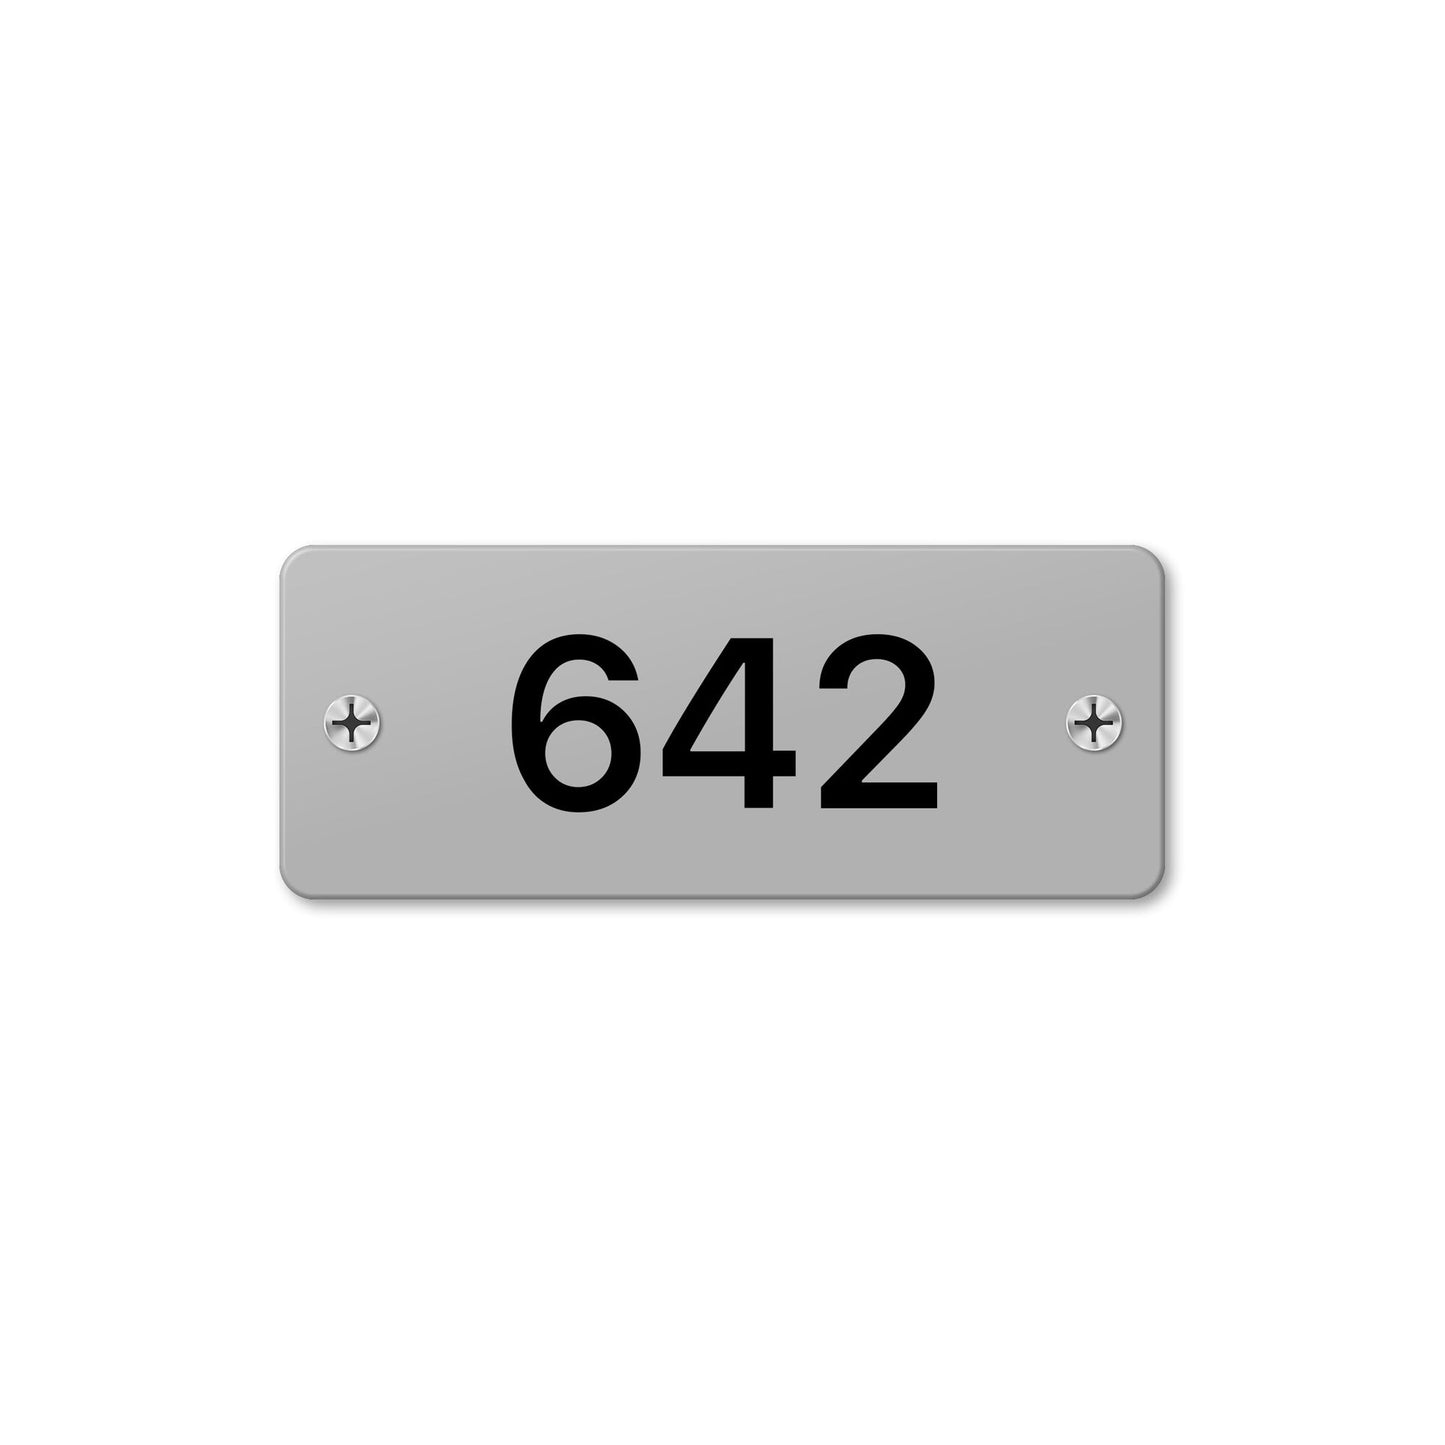 Numeral 642